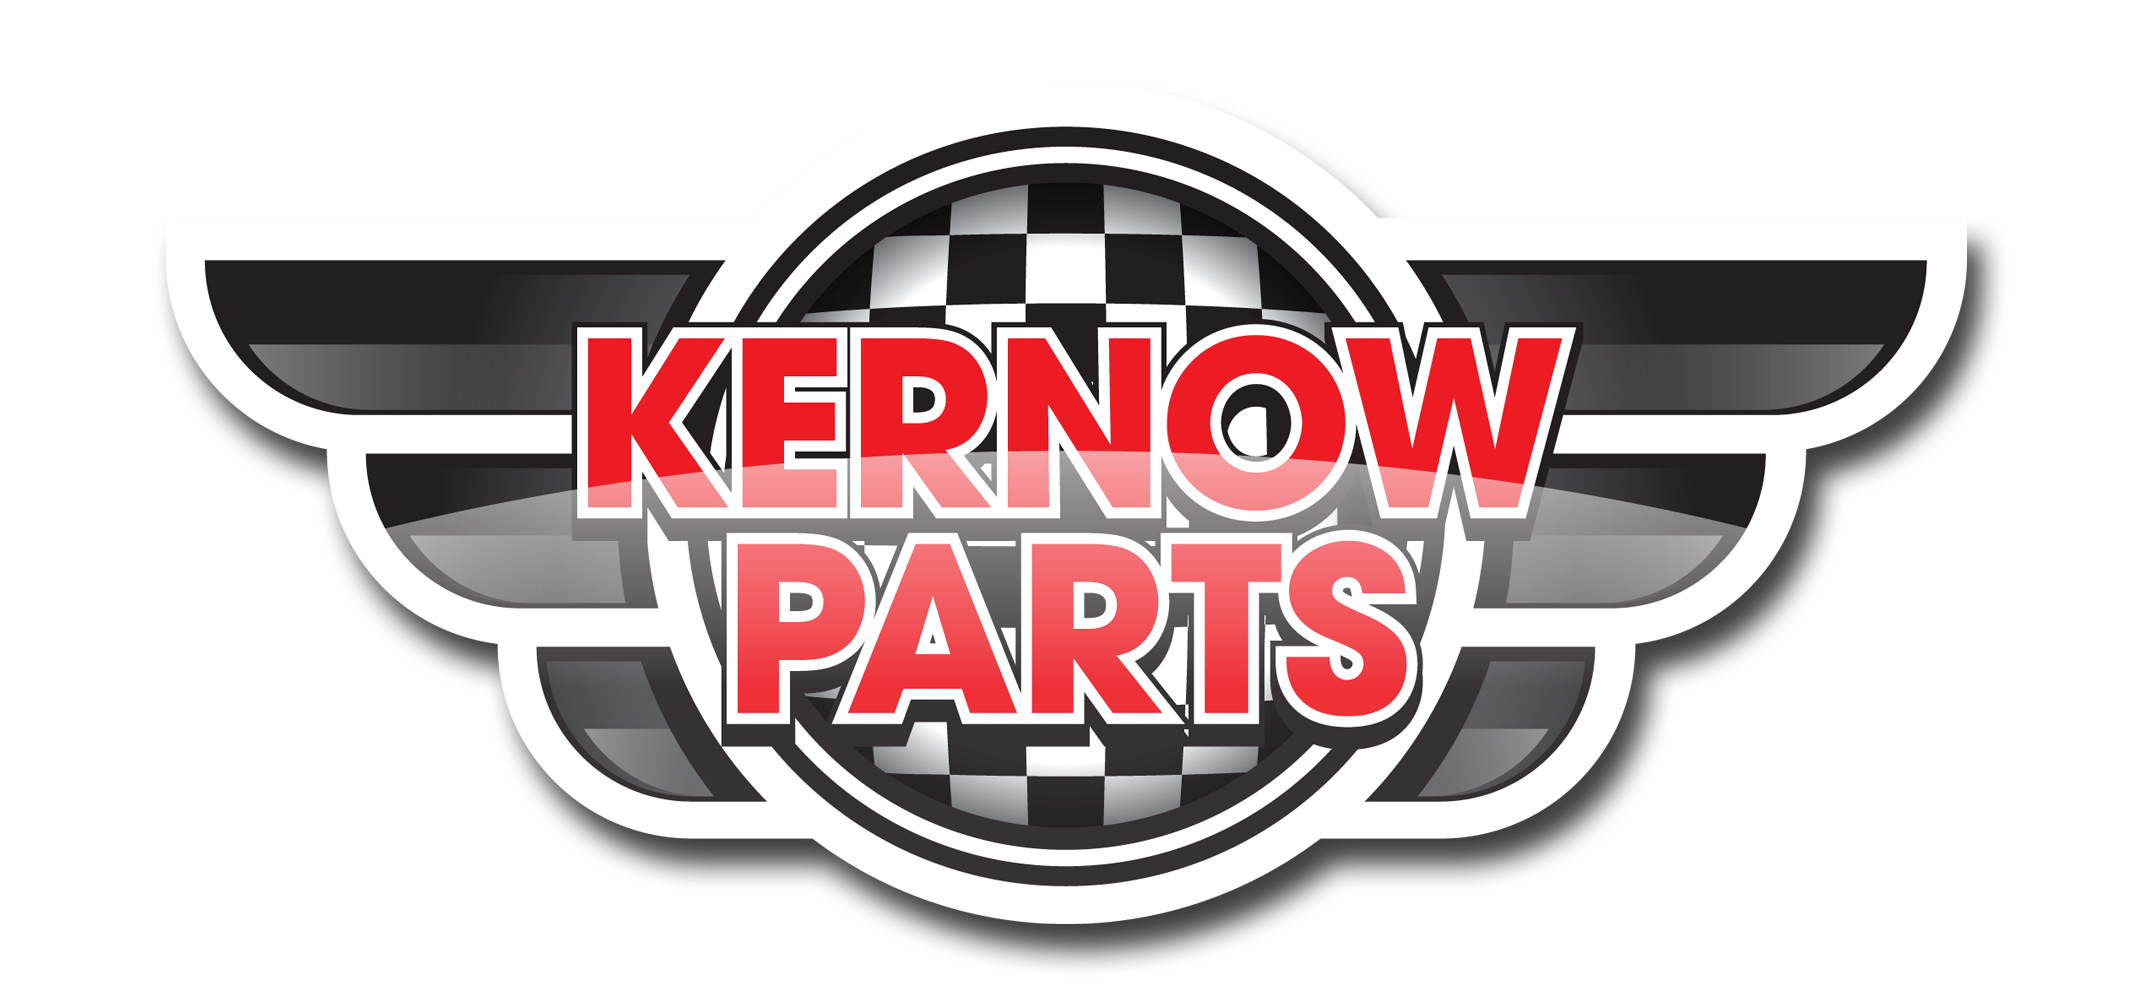 Kernow Parts - Professional Vehicle Recyclers